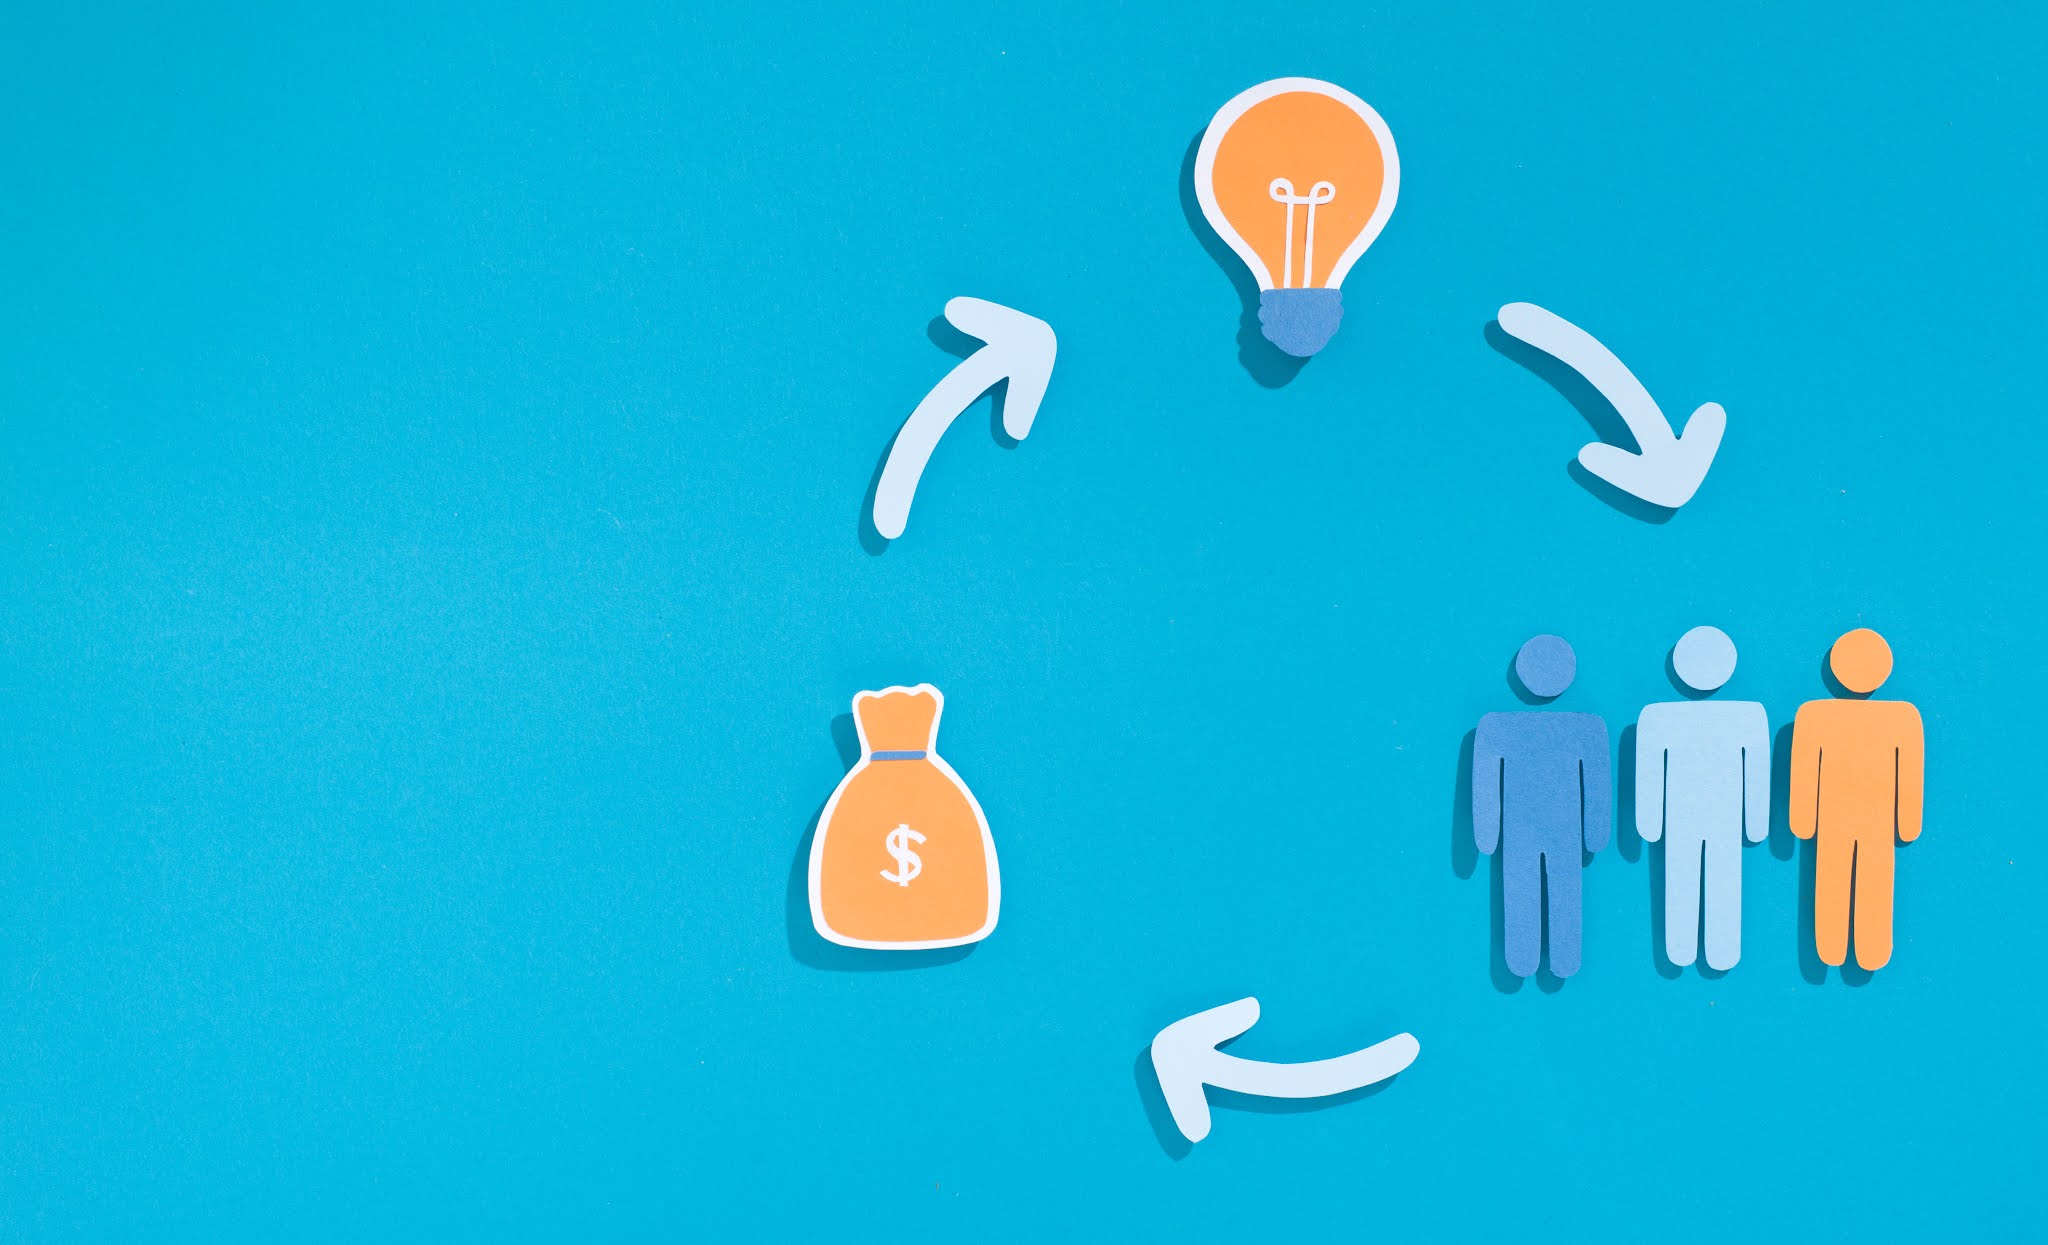 Types of crowdfunding. Idea connect